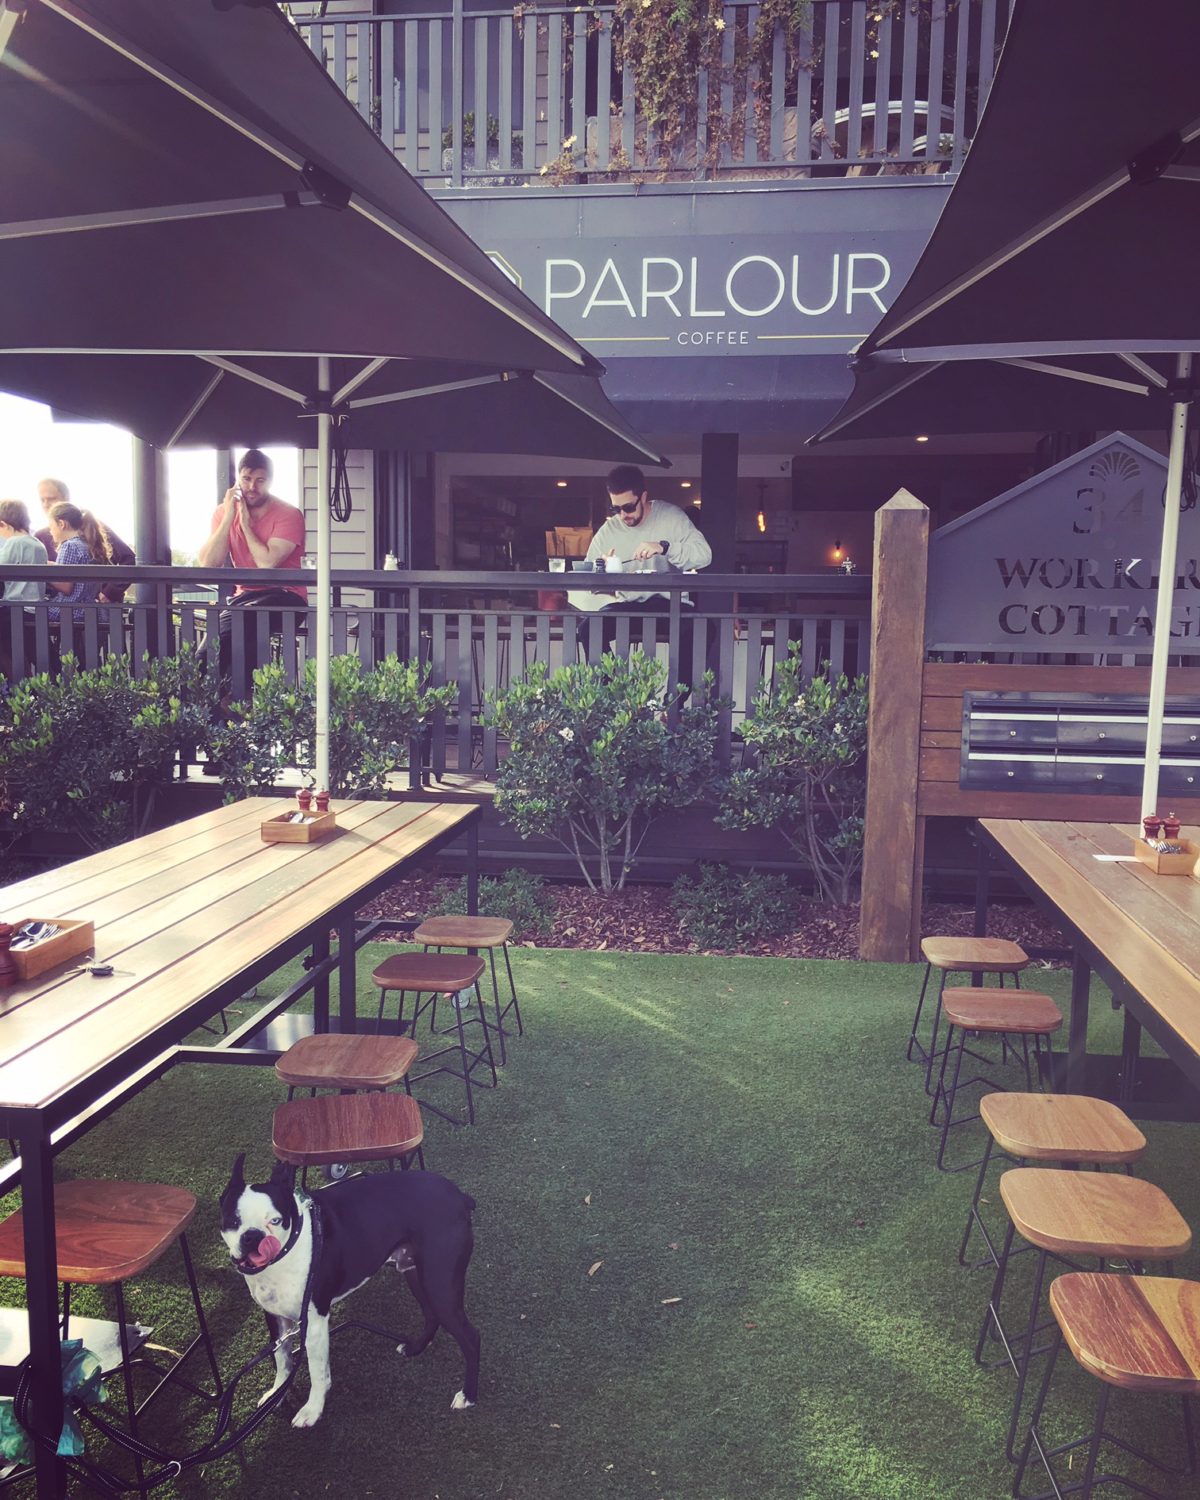 Brain’s Pet Friendly Cafe Discovery Mission – Parlour, West Burleigh